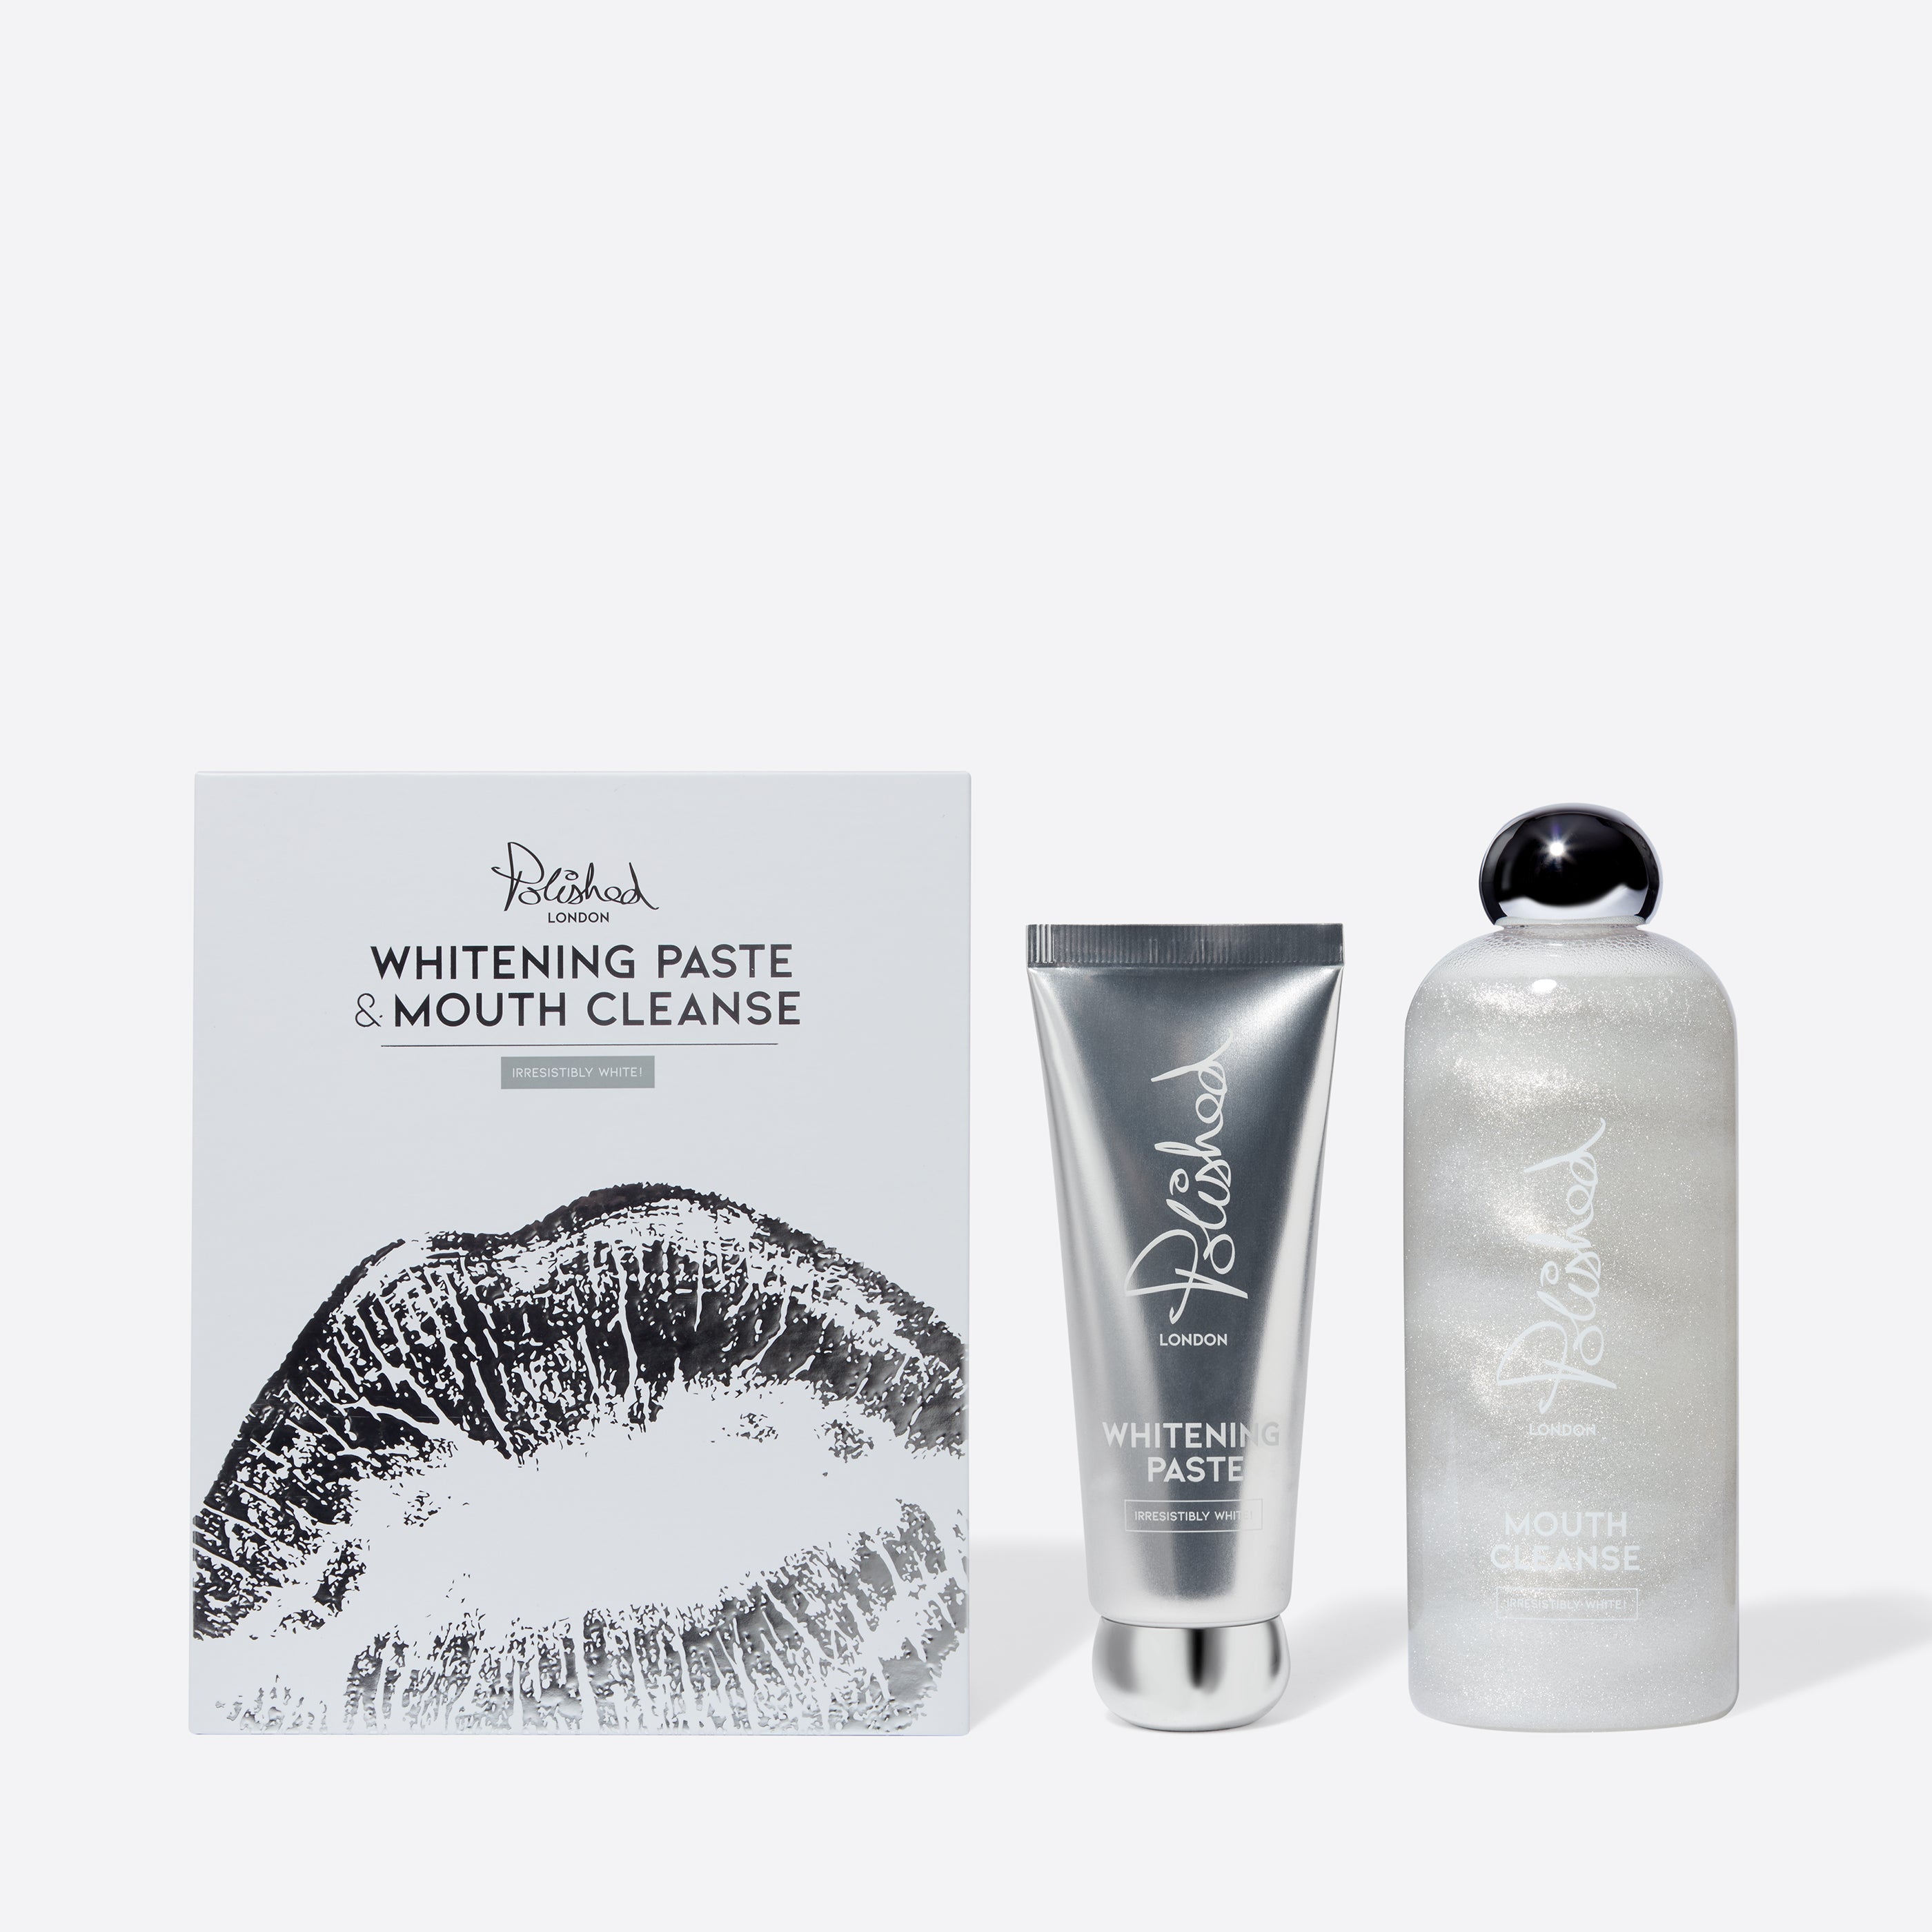 Whitening Paste & Mouth Cleanse